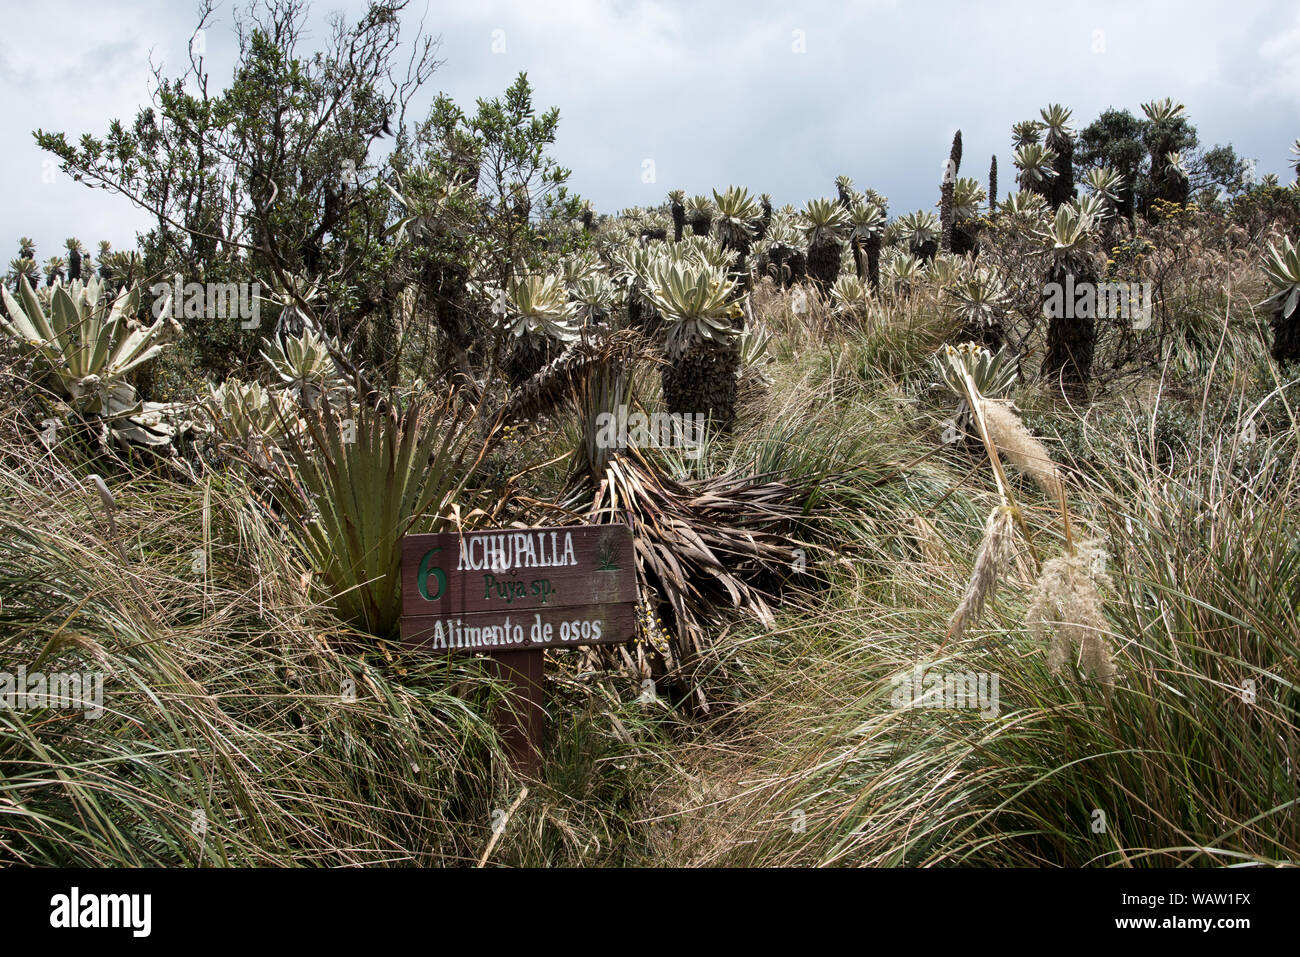 Achupalla is a Puya species growing on the Páramo highland in the Reserve Ecológica El Ángel at 3800 meters in the Andes of Northern Ecuador. Stock Photo